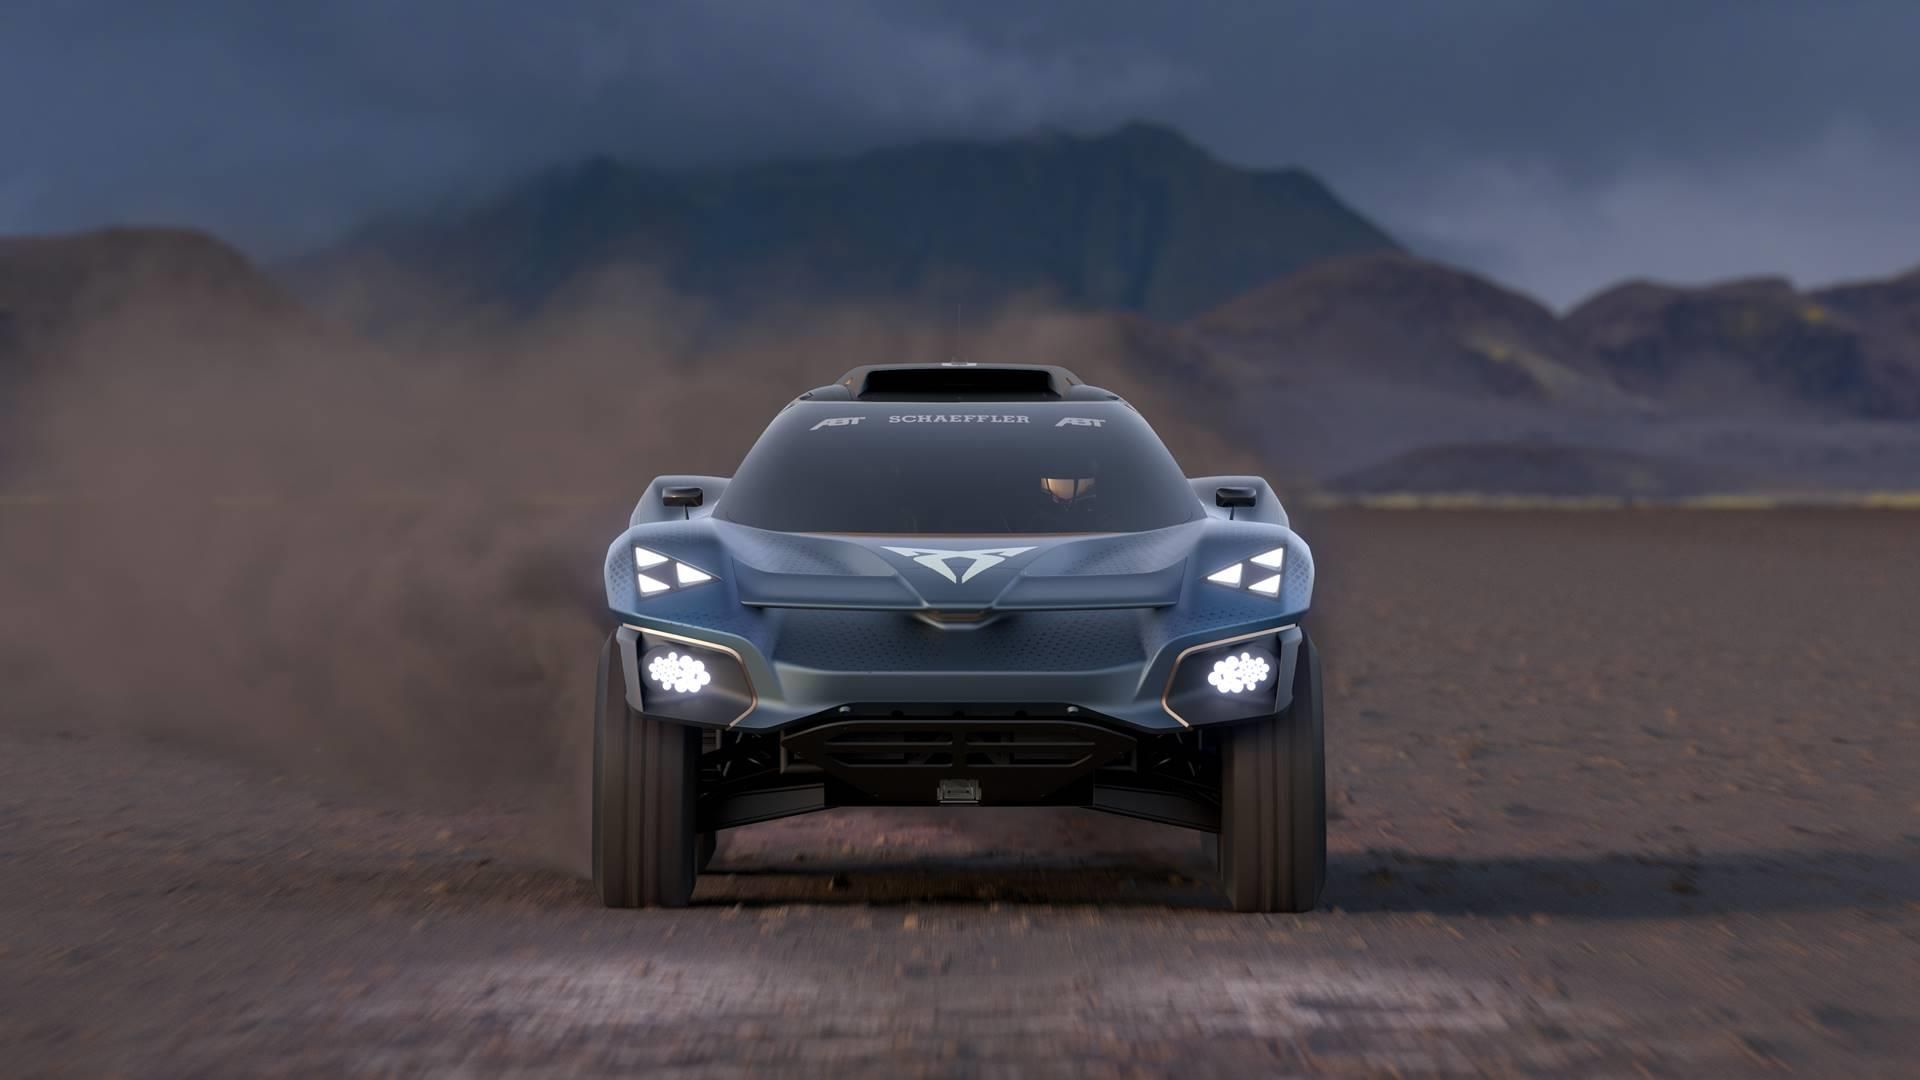 Cupra Tavascan Extreme E Concept, front view with headlights on